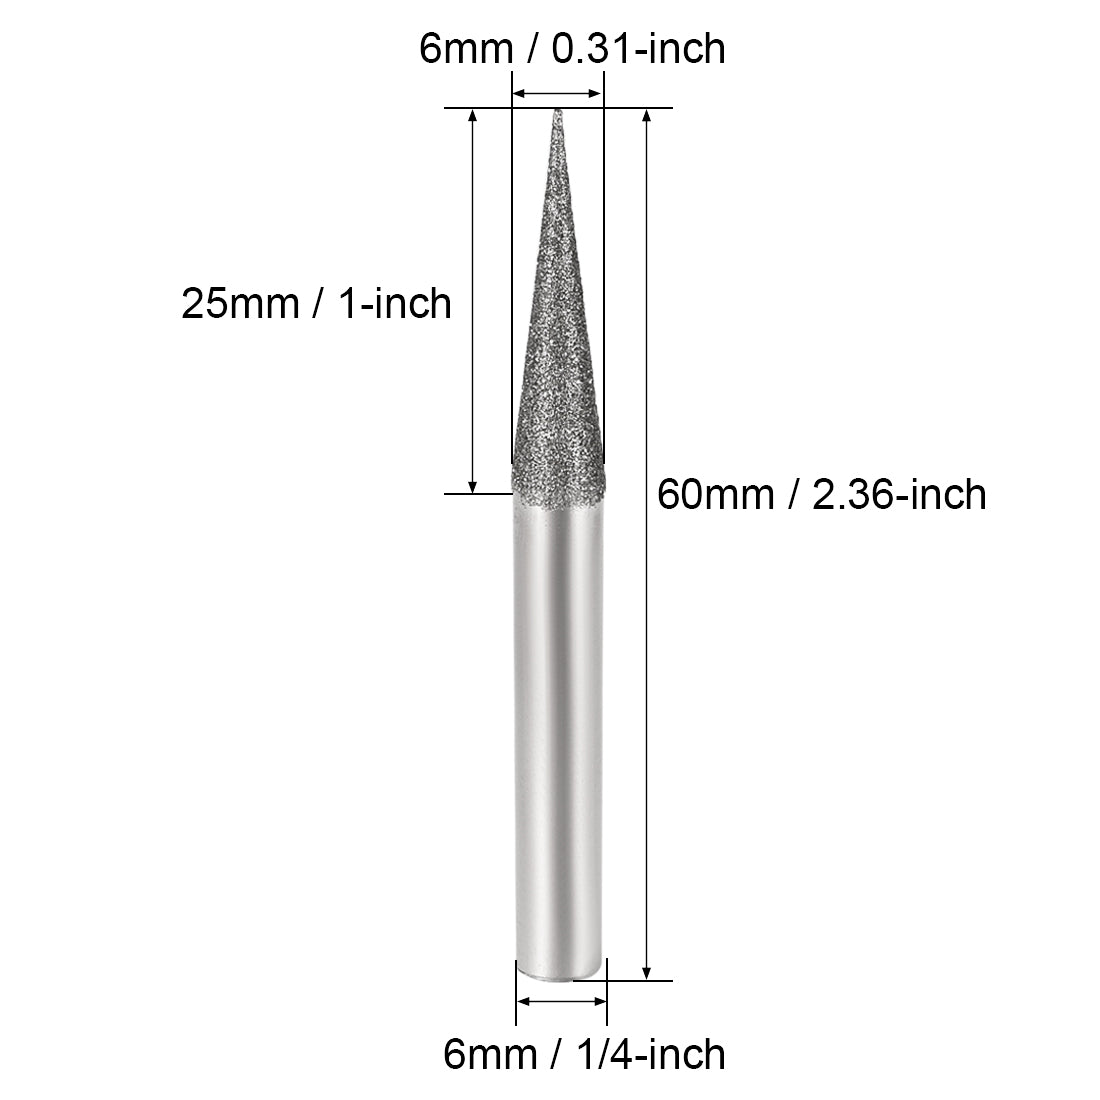 uxcell Uxcell Diamond Burrs Grinding Drill Bits for Carving Rotary Tool 1/4-Inch Shank 6mm Pointed 150 Grit 5 Pcs